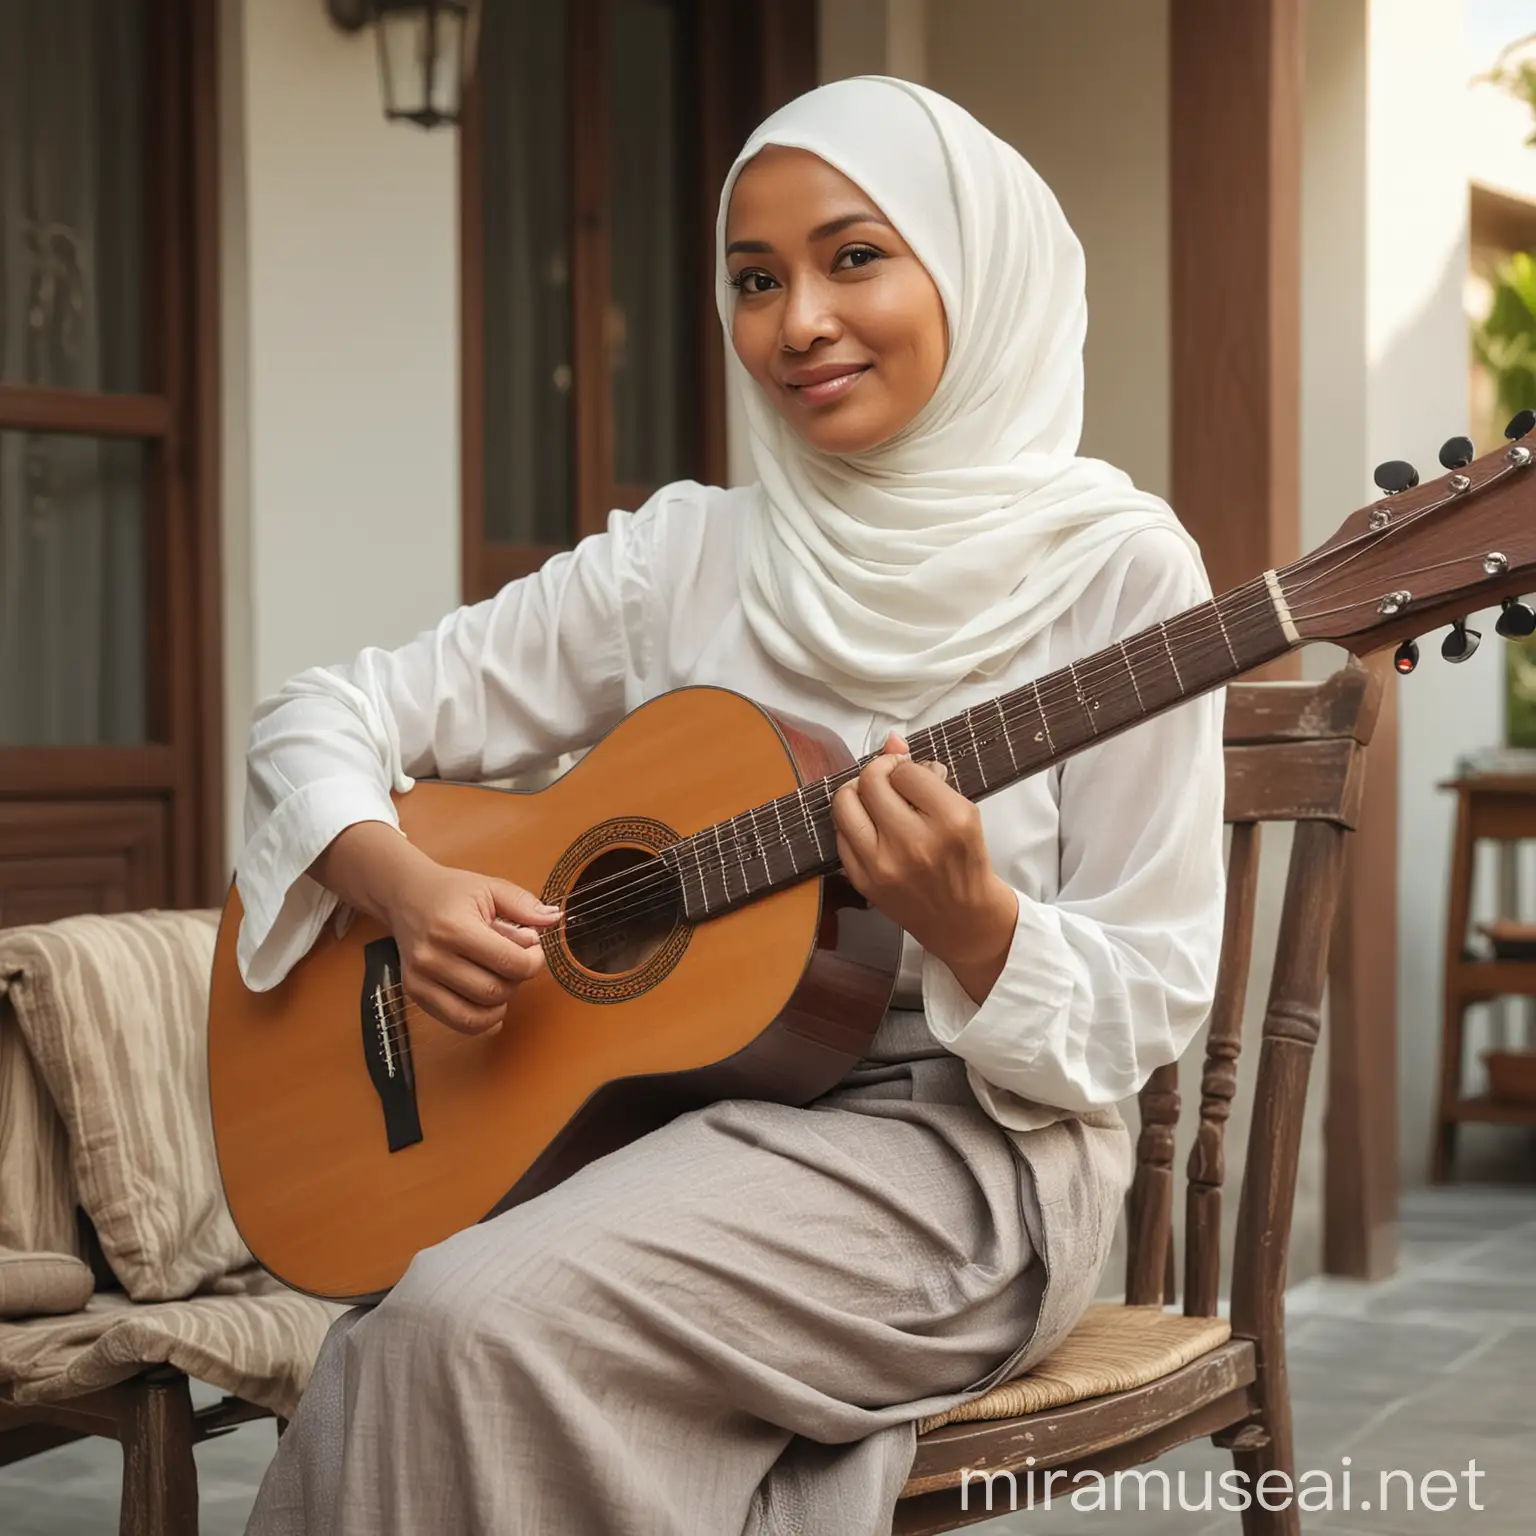 Indonesian Woman in Hijab Playing Guitar on Bright Day